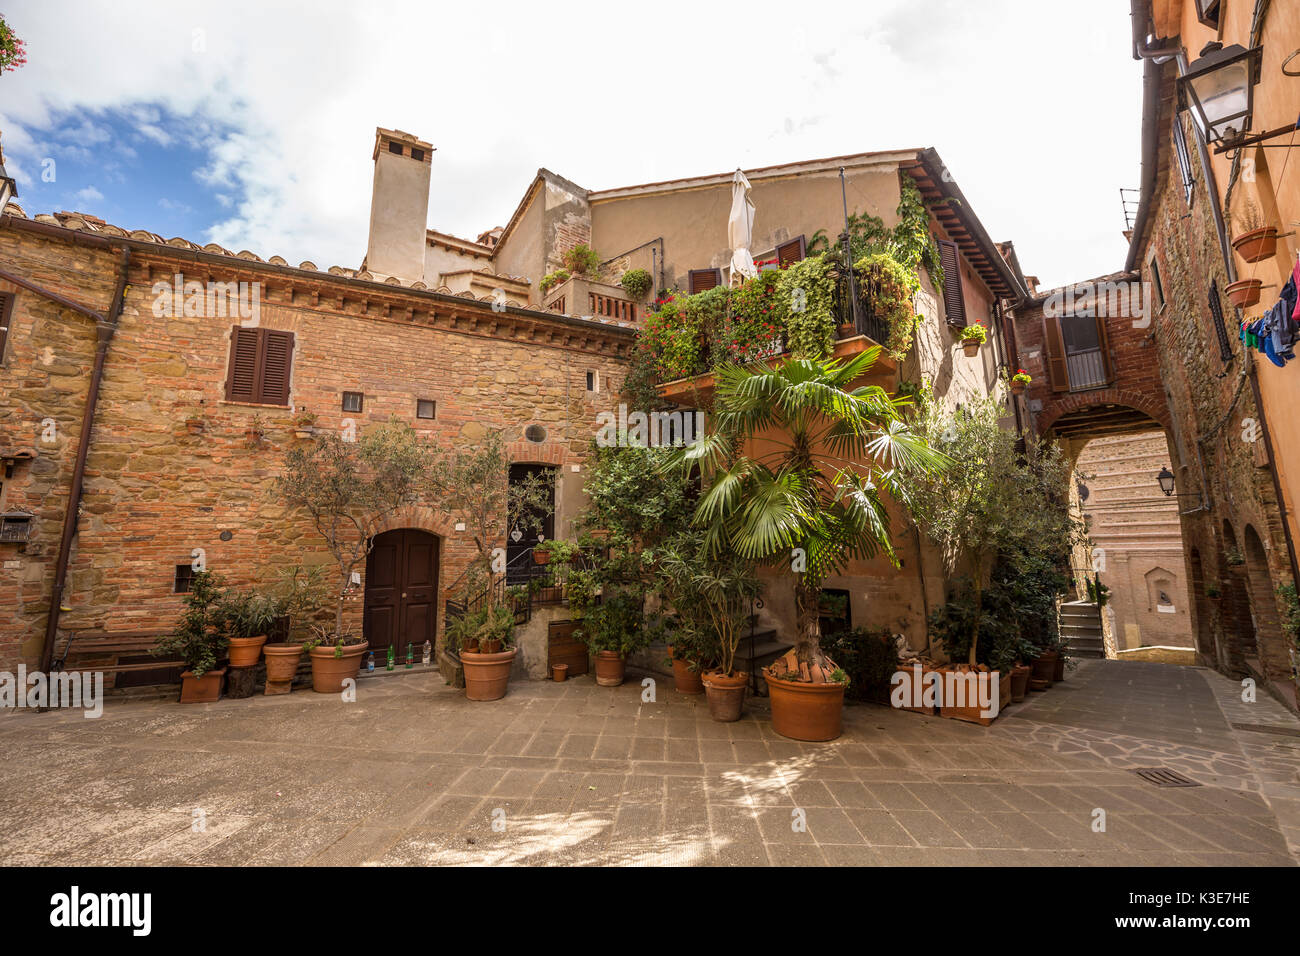 Panicale, one of the most beautiful villages in Italy. Stock Photo